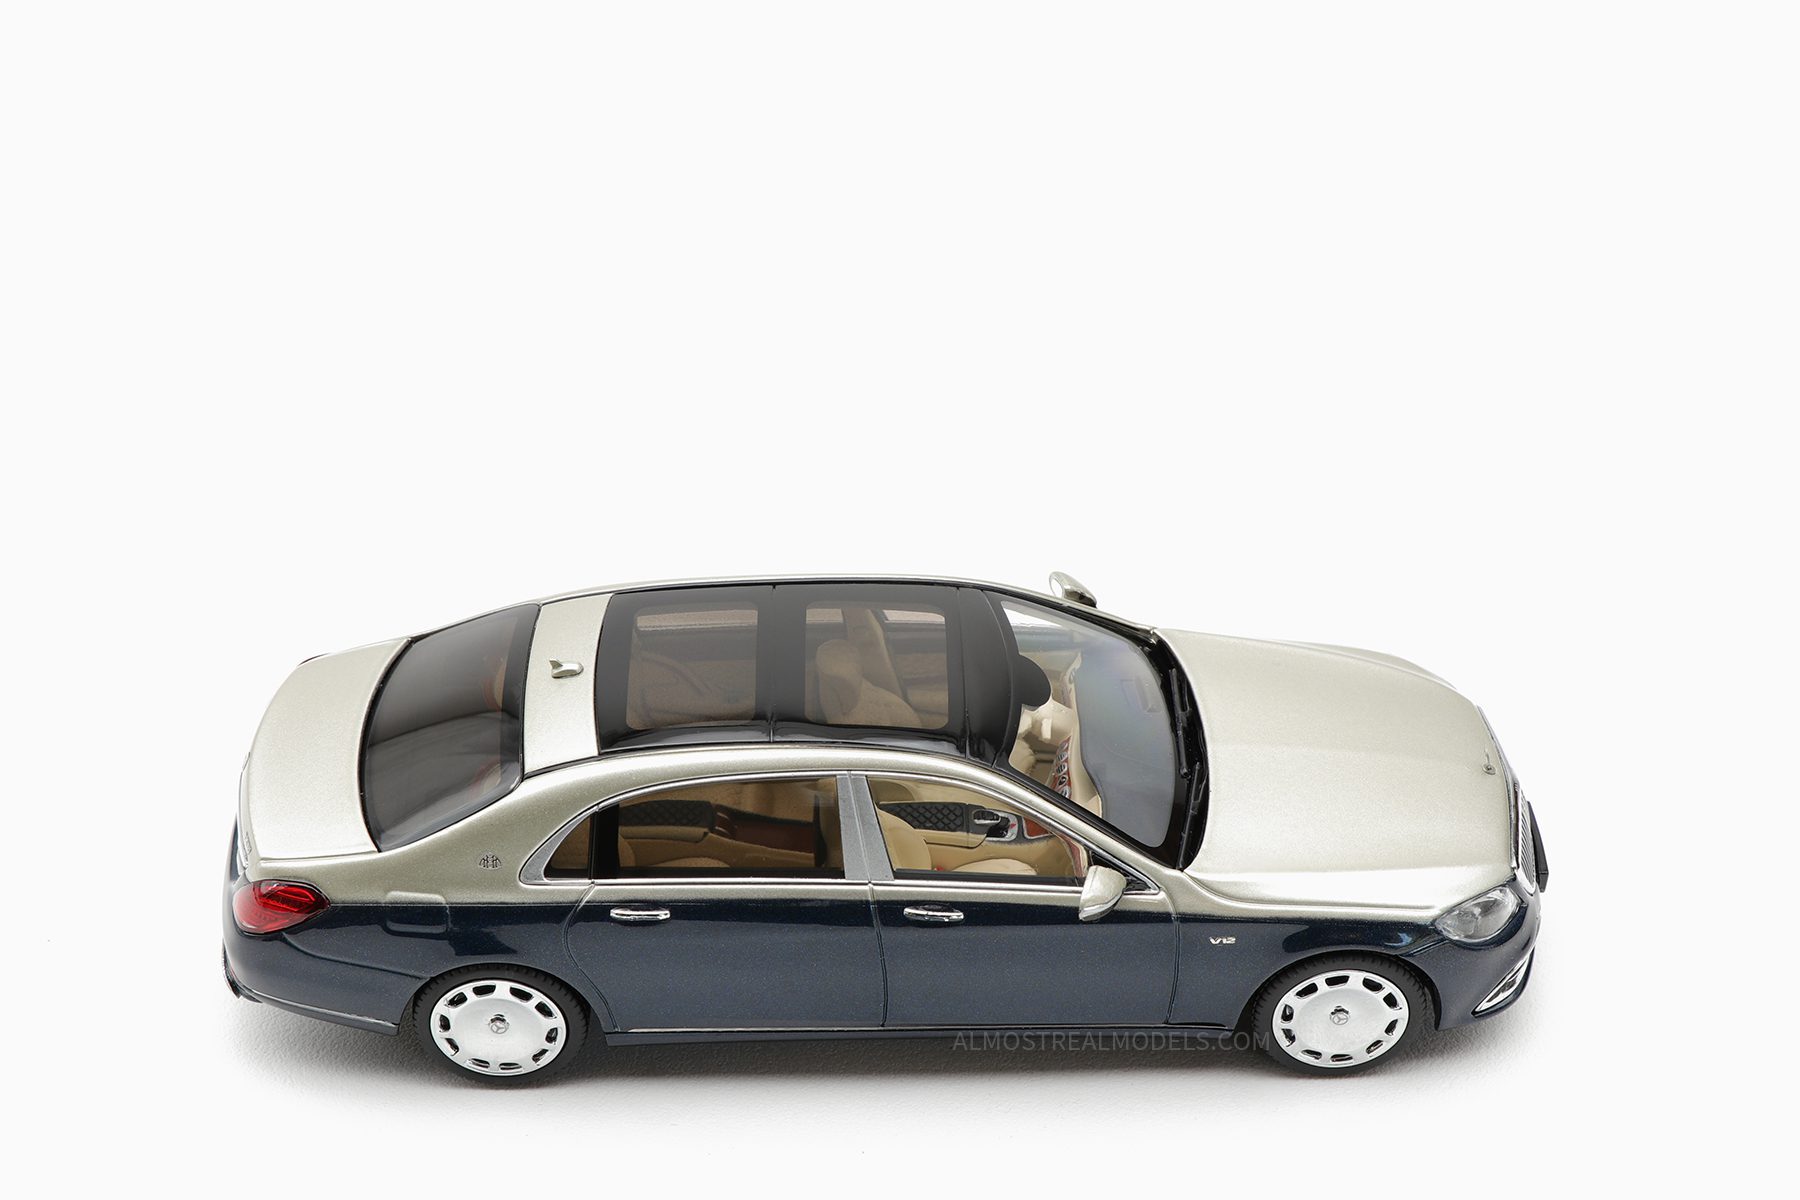 Mercedes-Maybach S-Class - 2019 - Anthracite Blue/Aragonite Silver 1:43 by Almost Real